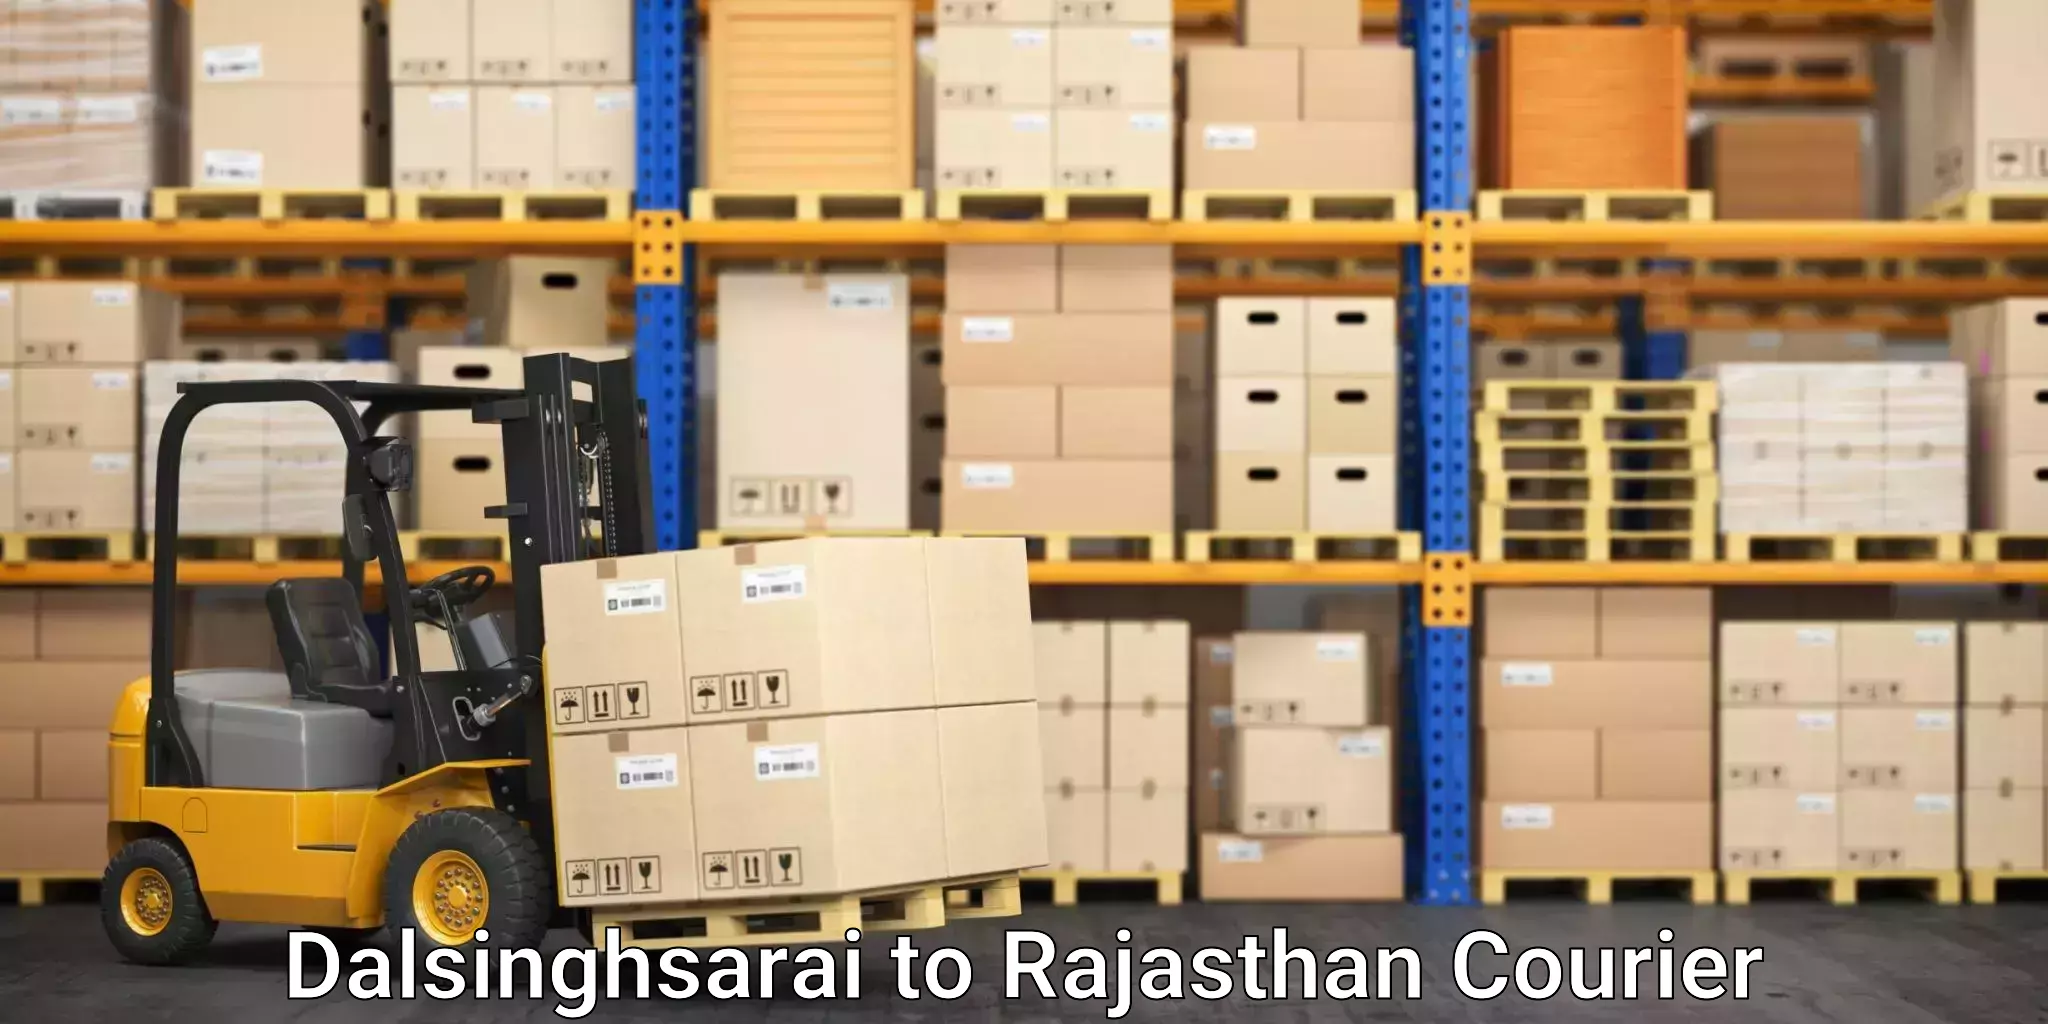 Cost-effective moving options Dalsinghsarai to Chittorgarh